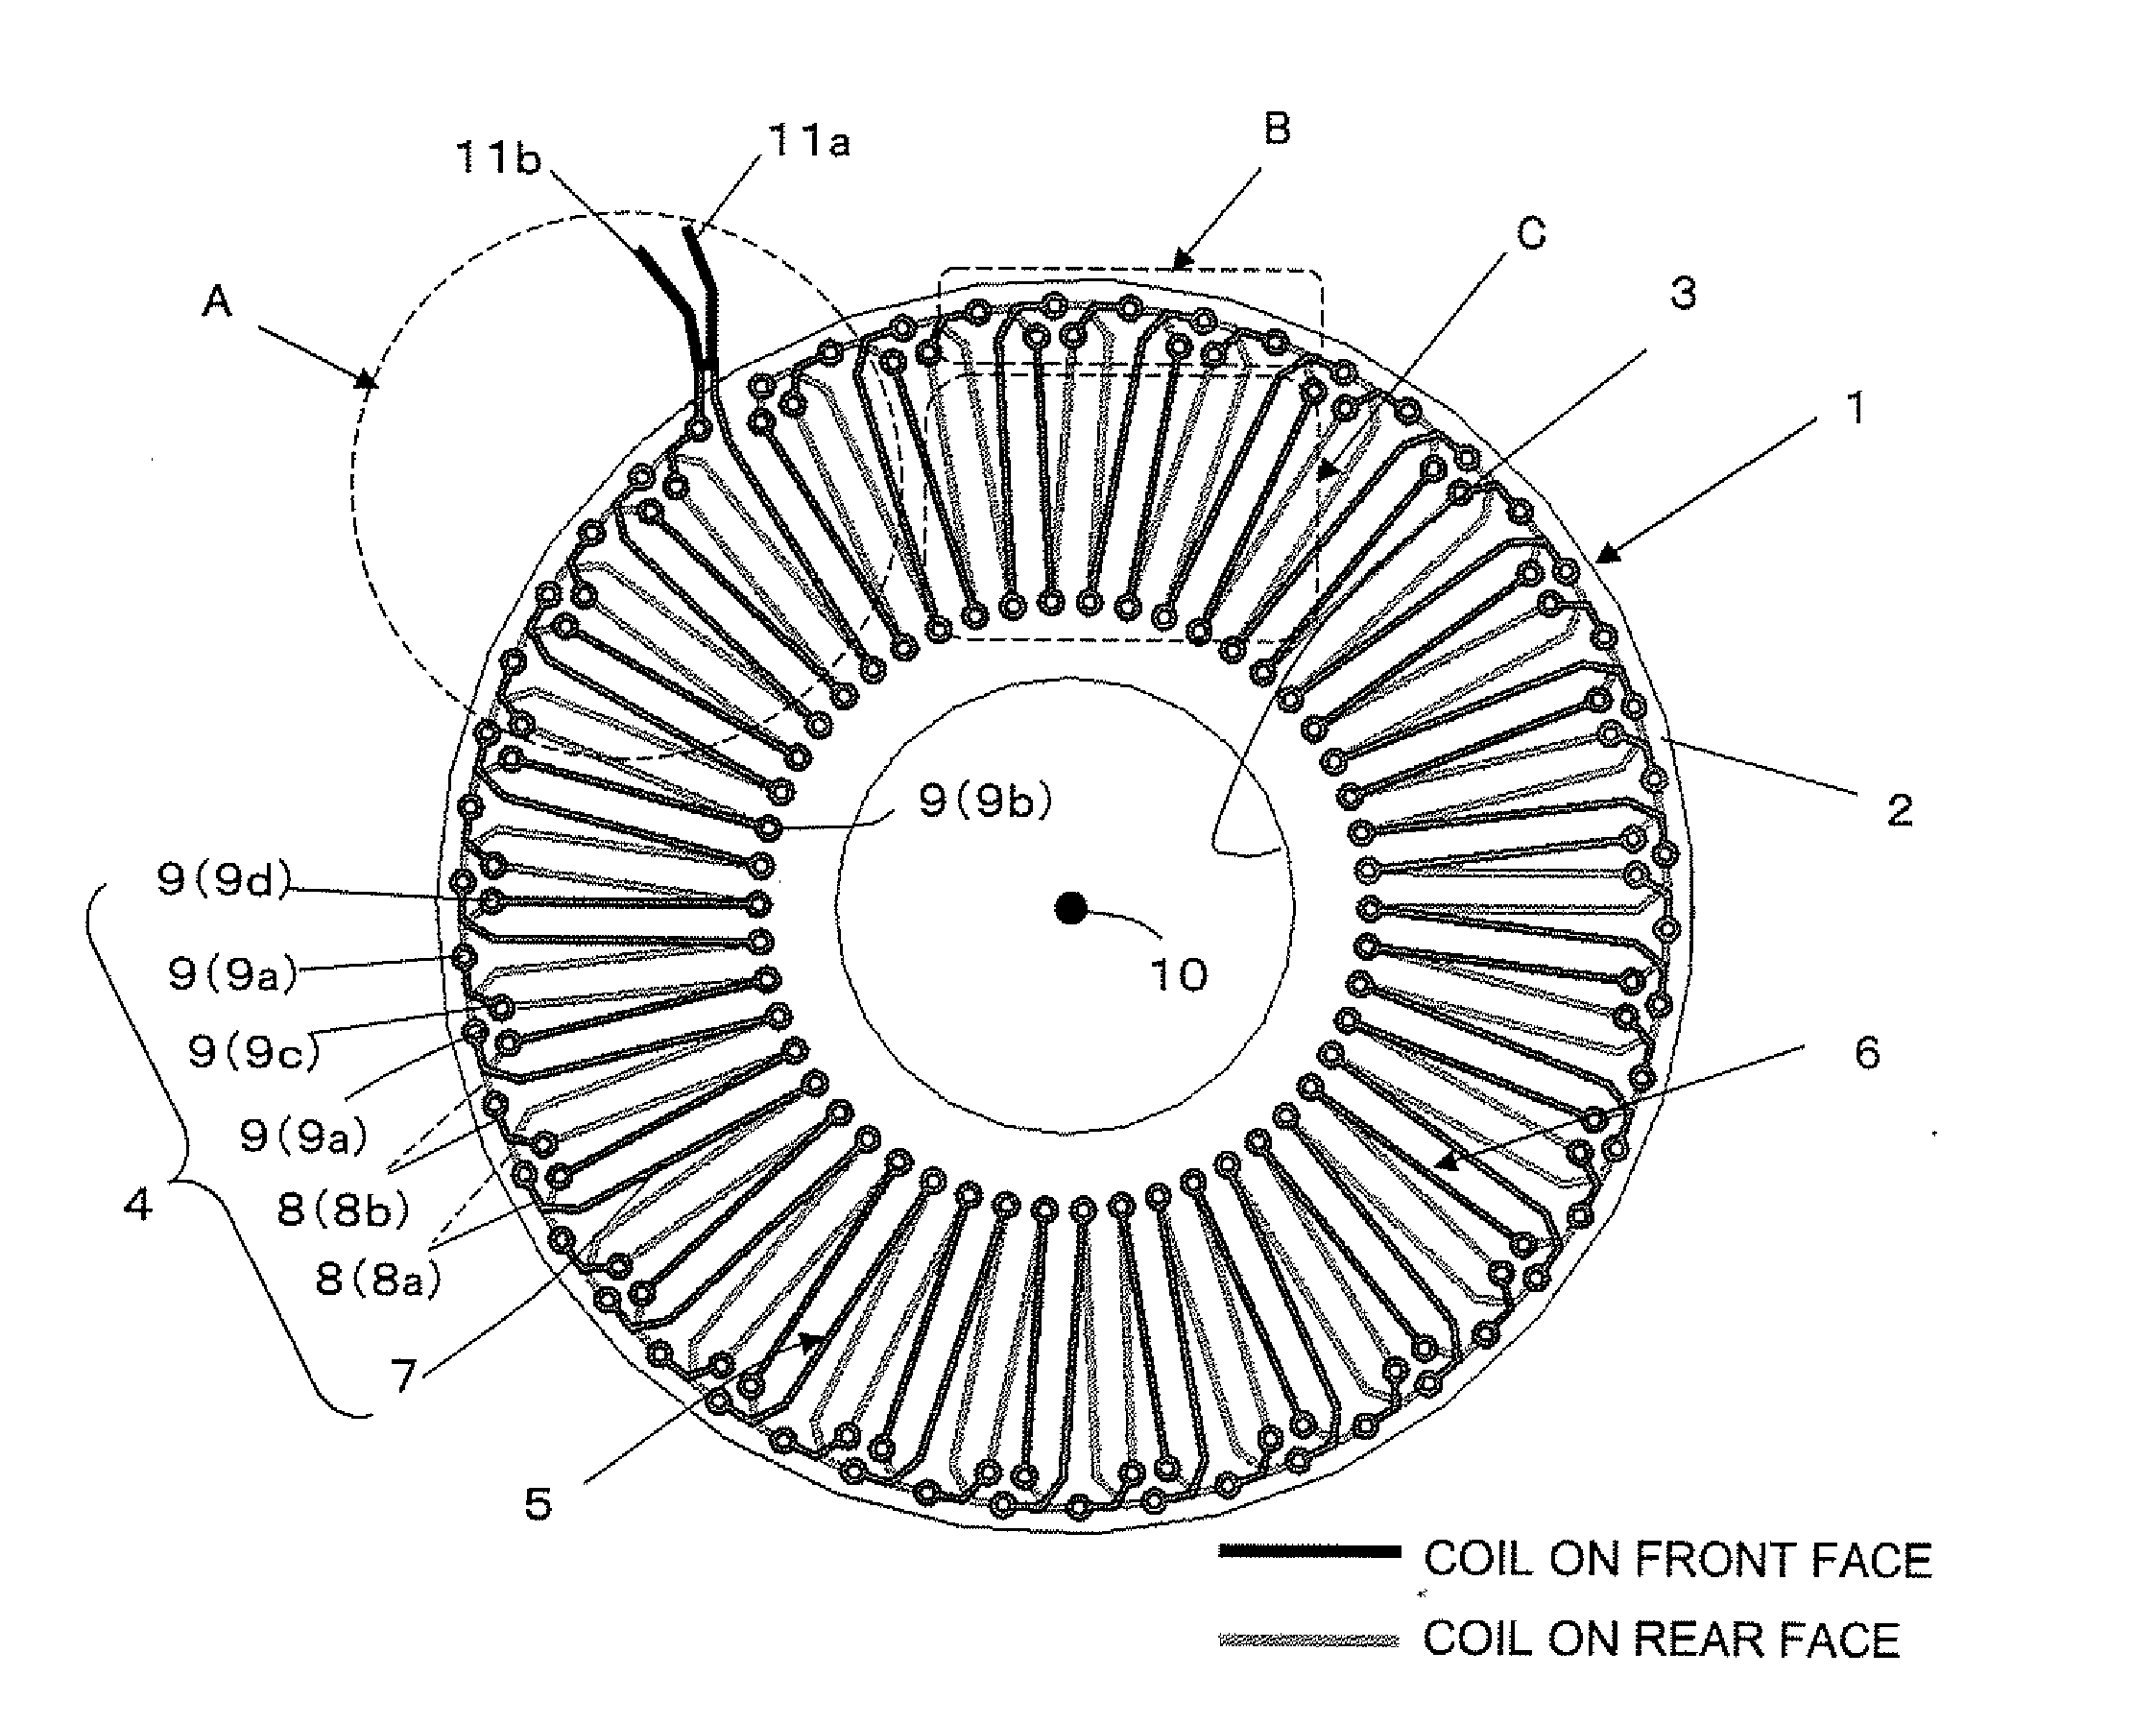 Alternating current detection coil